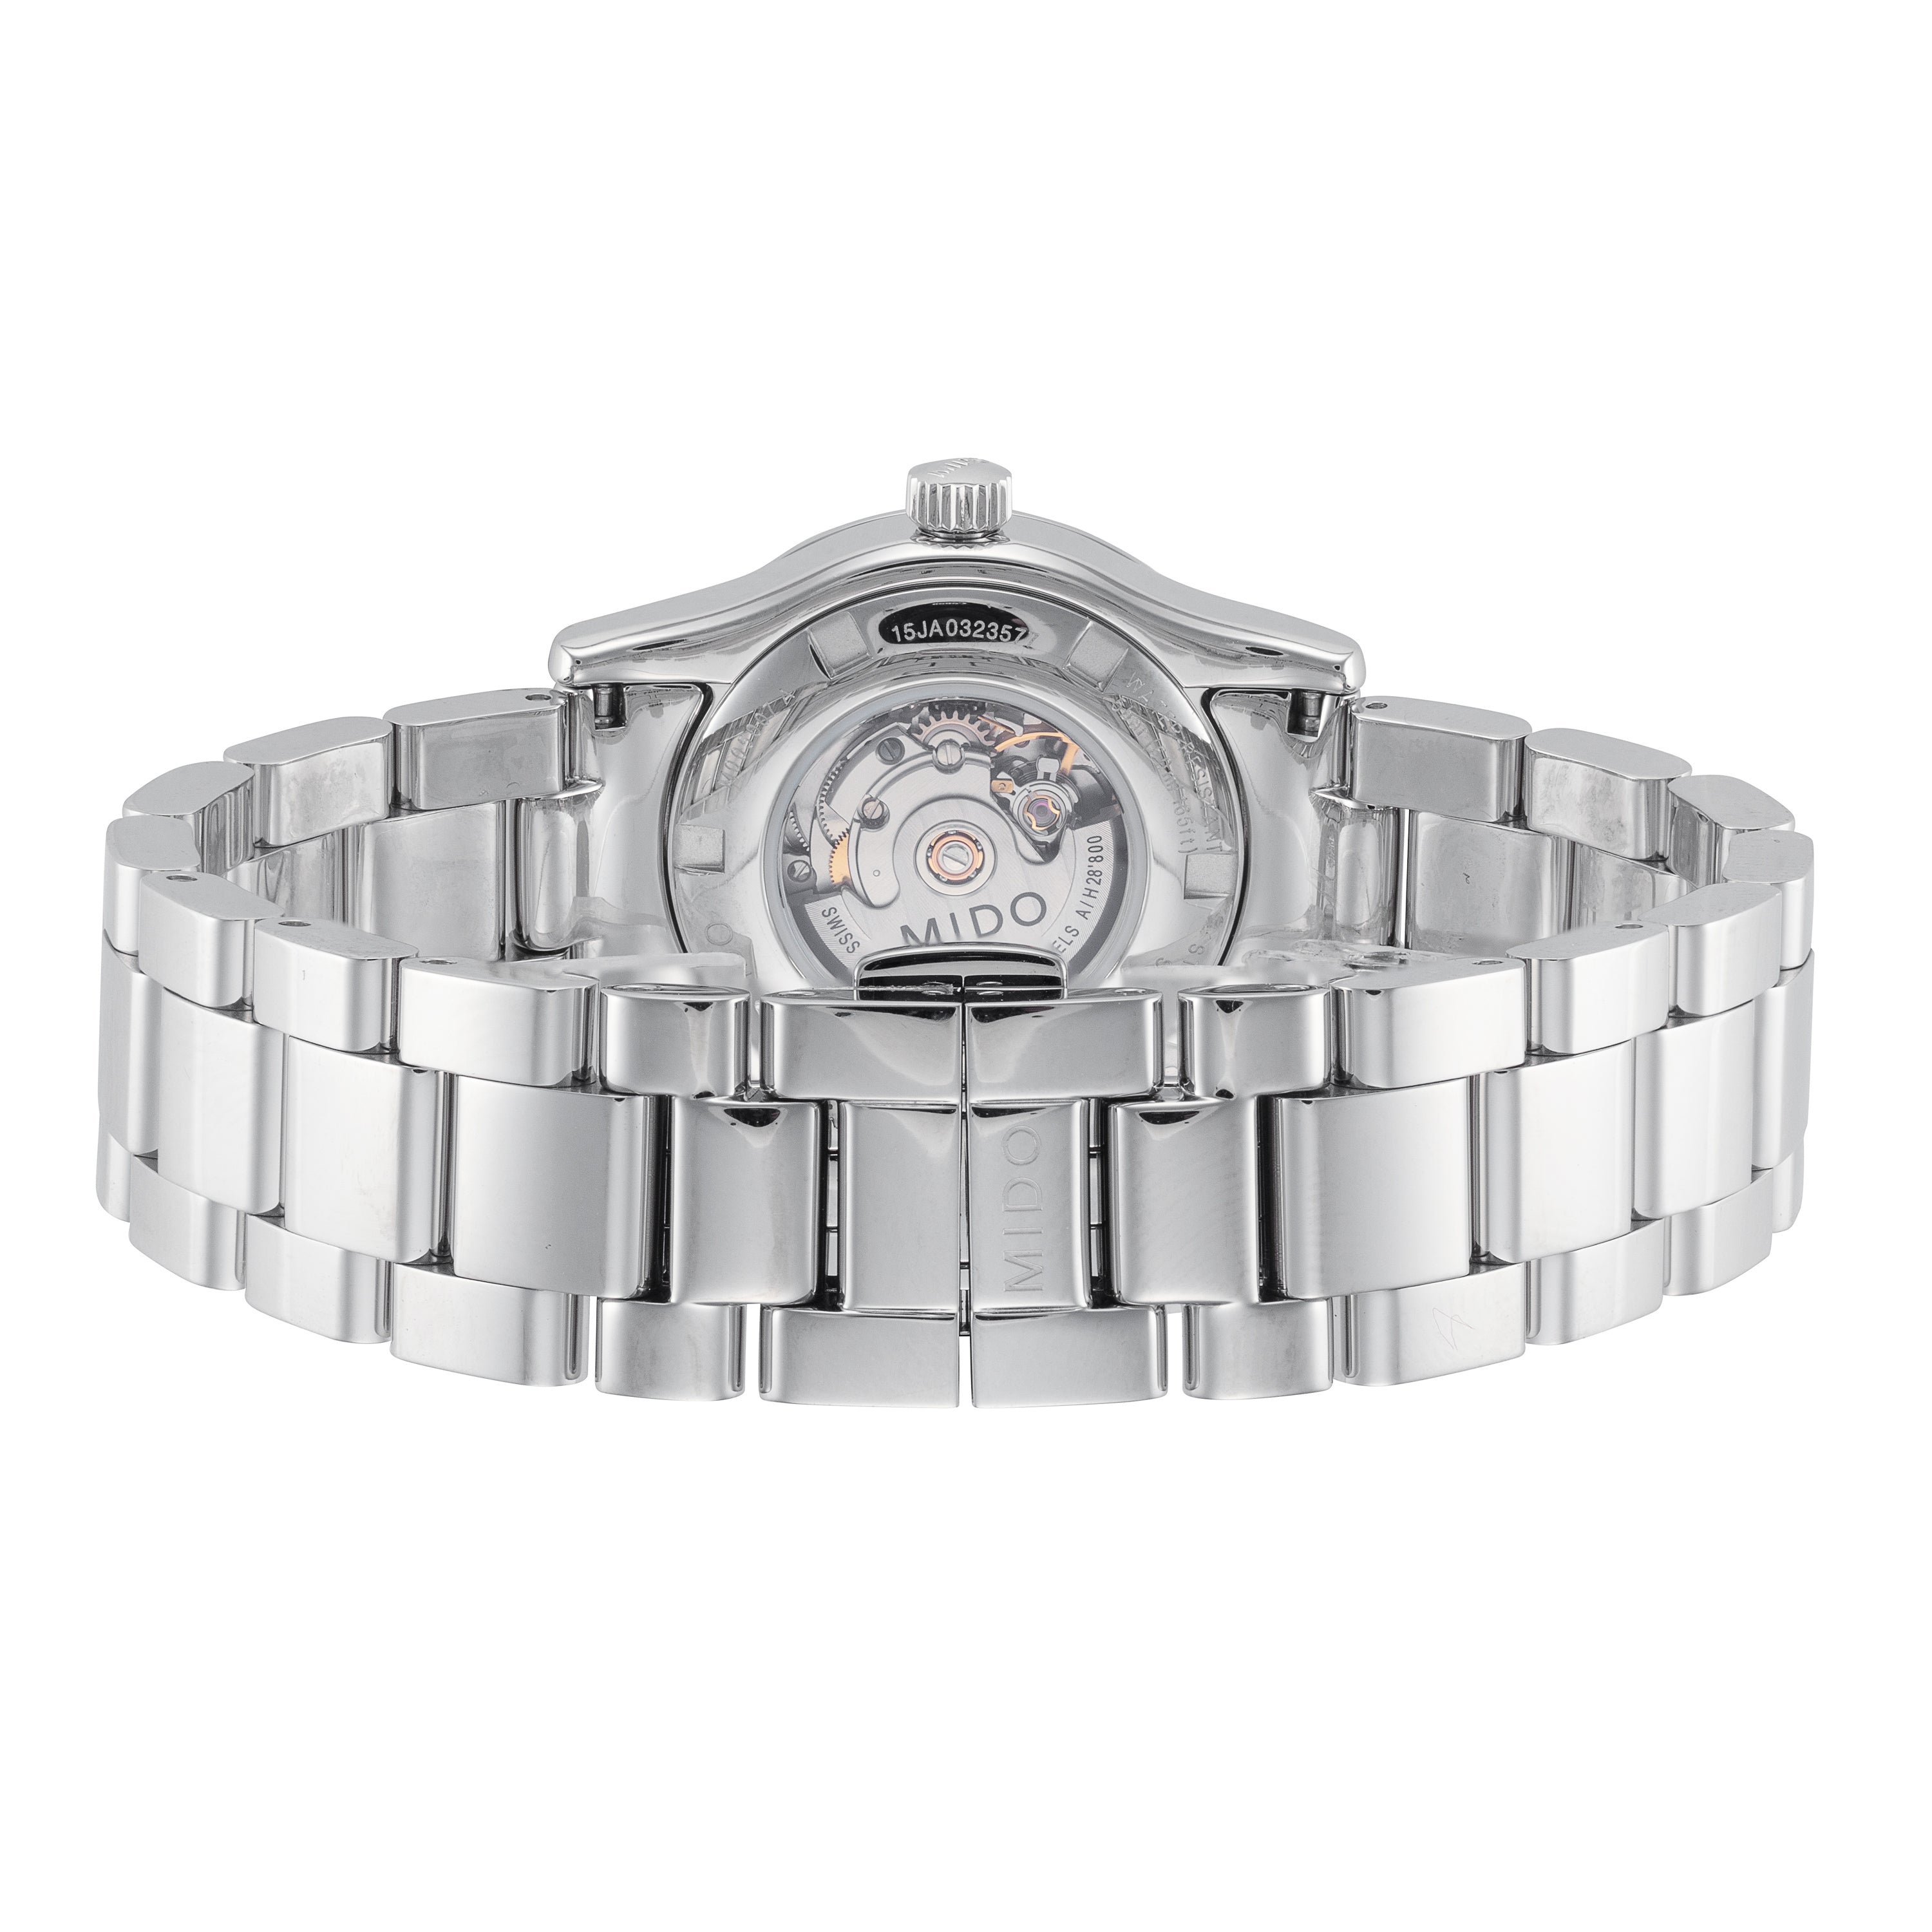 title:Mido Women's M0050071110100 Multifort 31mm Automatic Watch;color:Silver